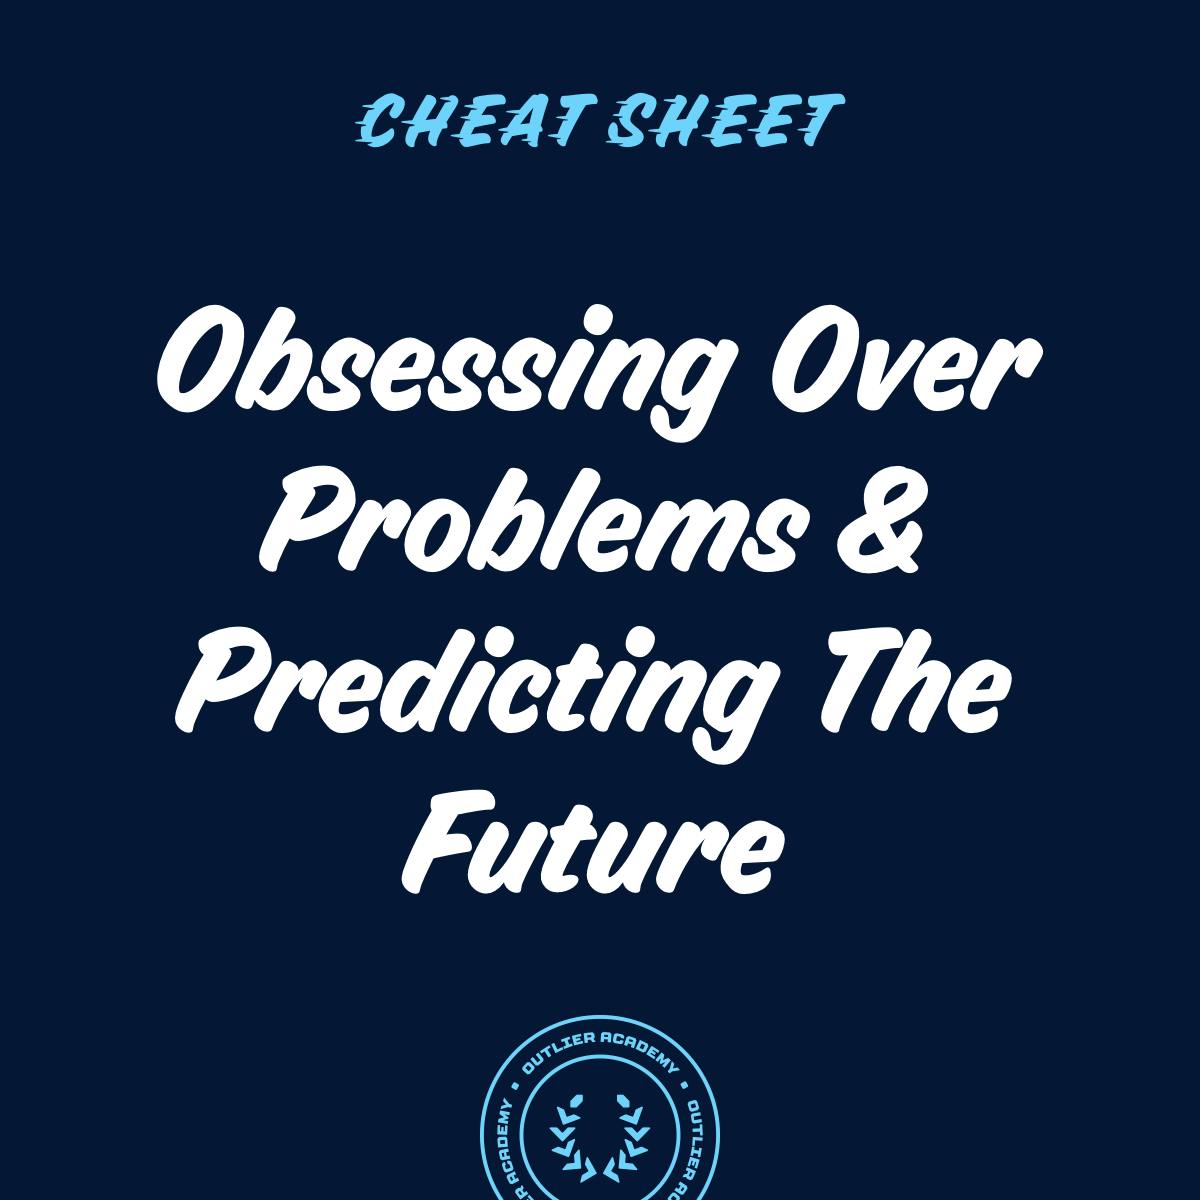 Trailer - Cheat Sheet: On Obsessing Over Problems, Predicting the Future, and Why Healthcare Should be a Product (Not a Service)